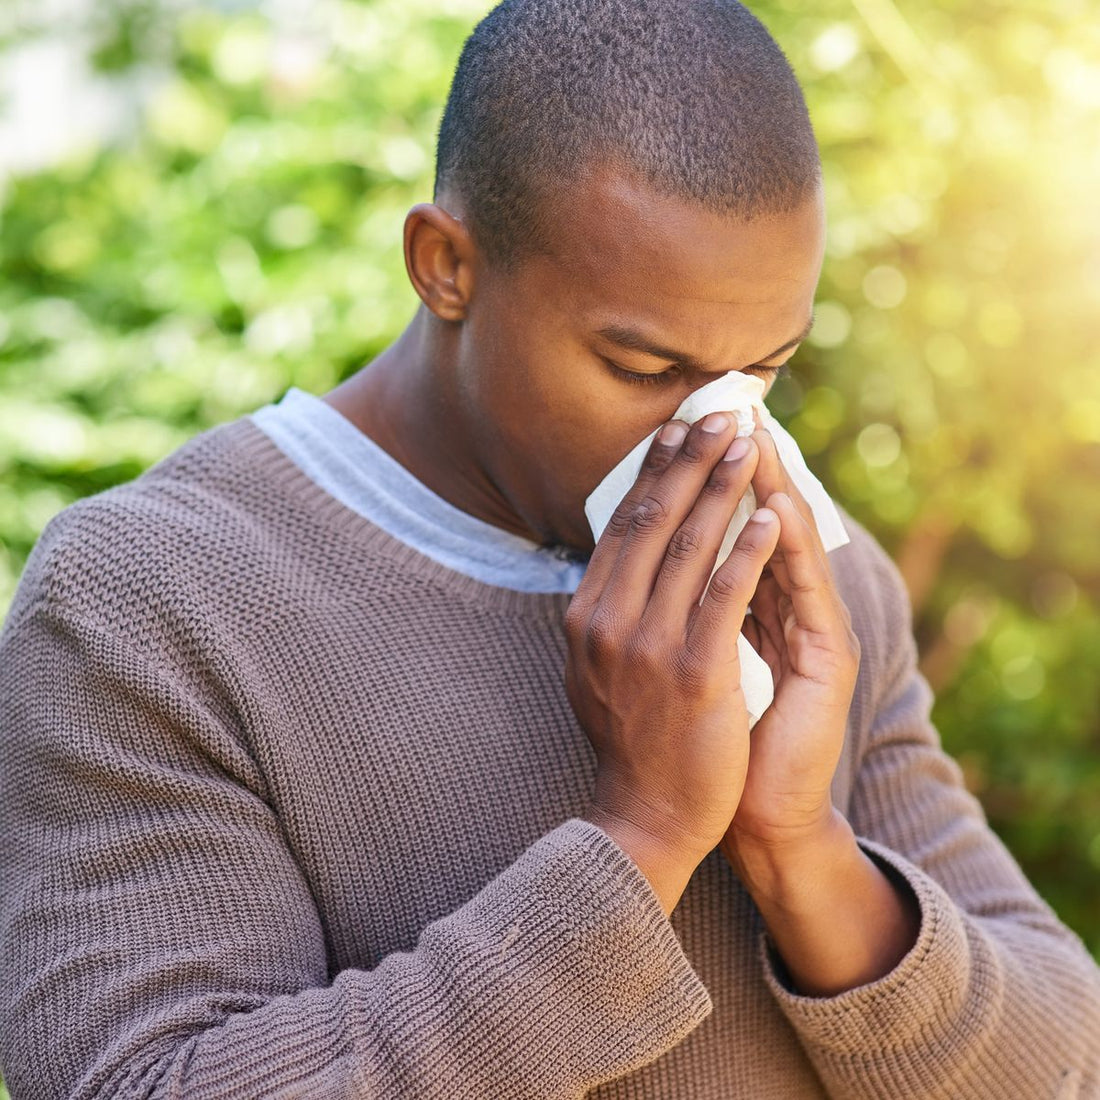 Does CBD Help With Allergies?